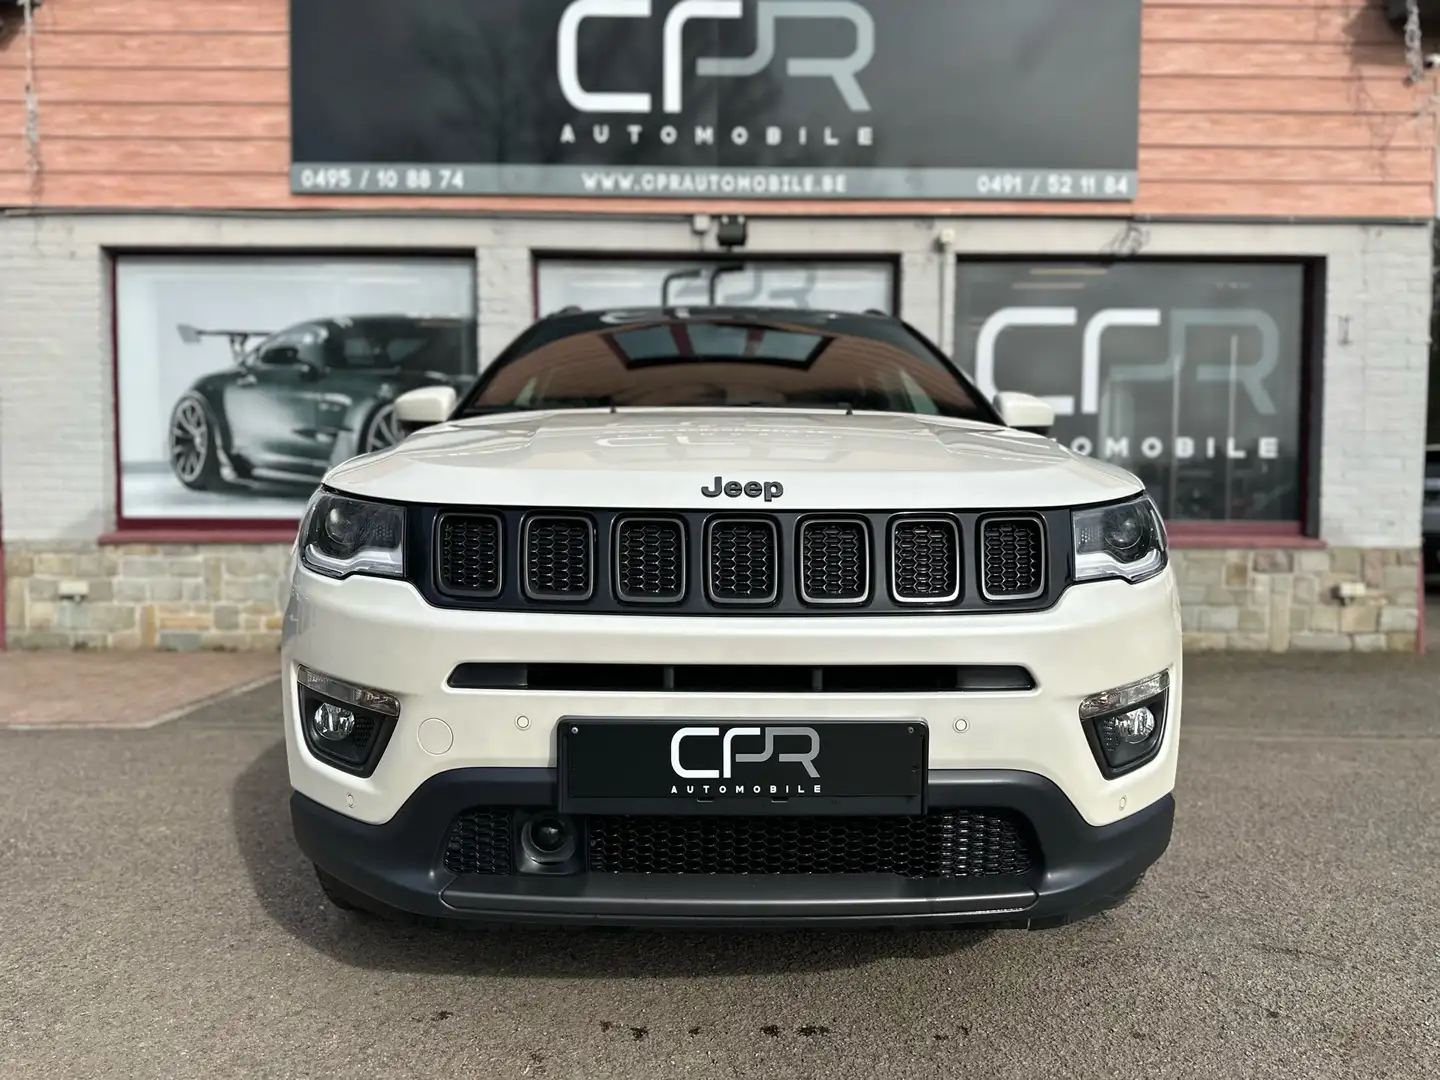 Jeep Compass 1.4 Turbo 4x4 * GPS * LED * CAMERA * SONO * CUIR * Wit - 2